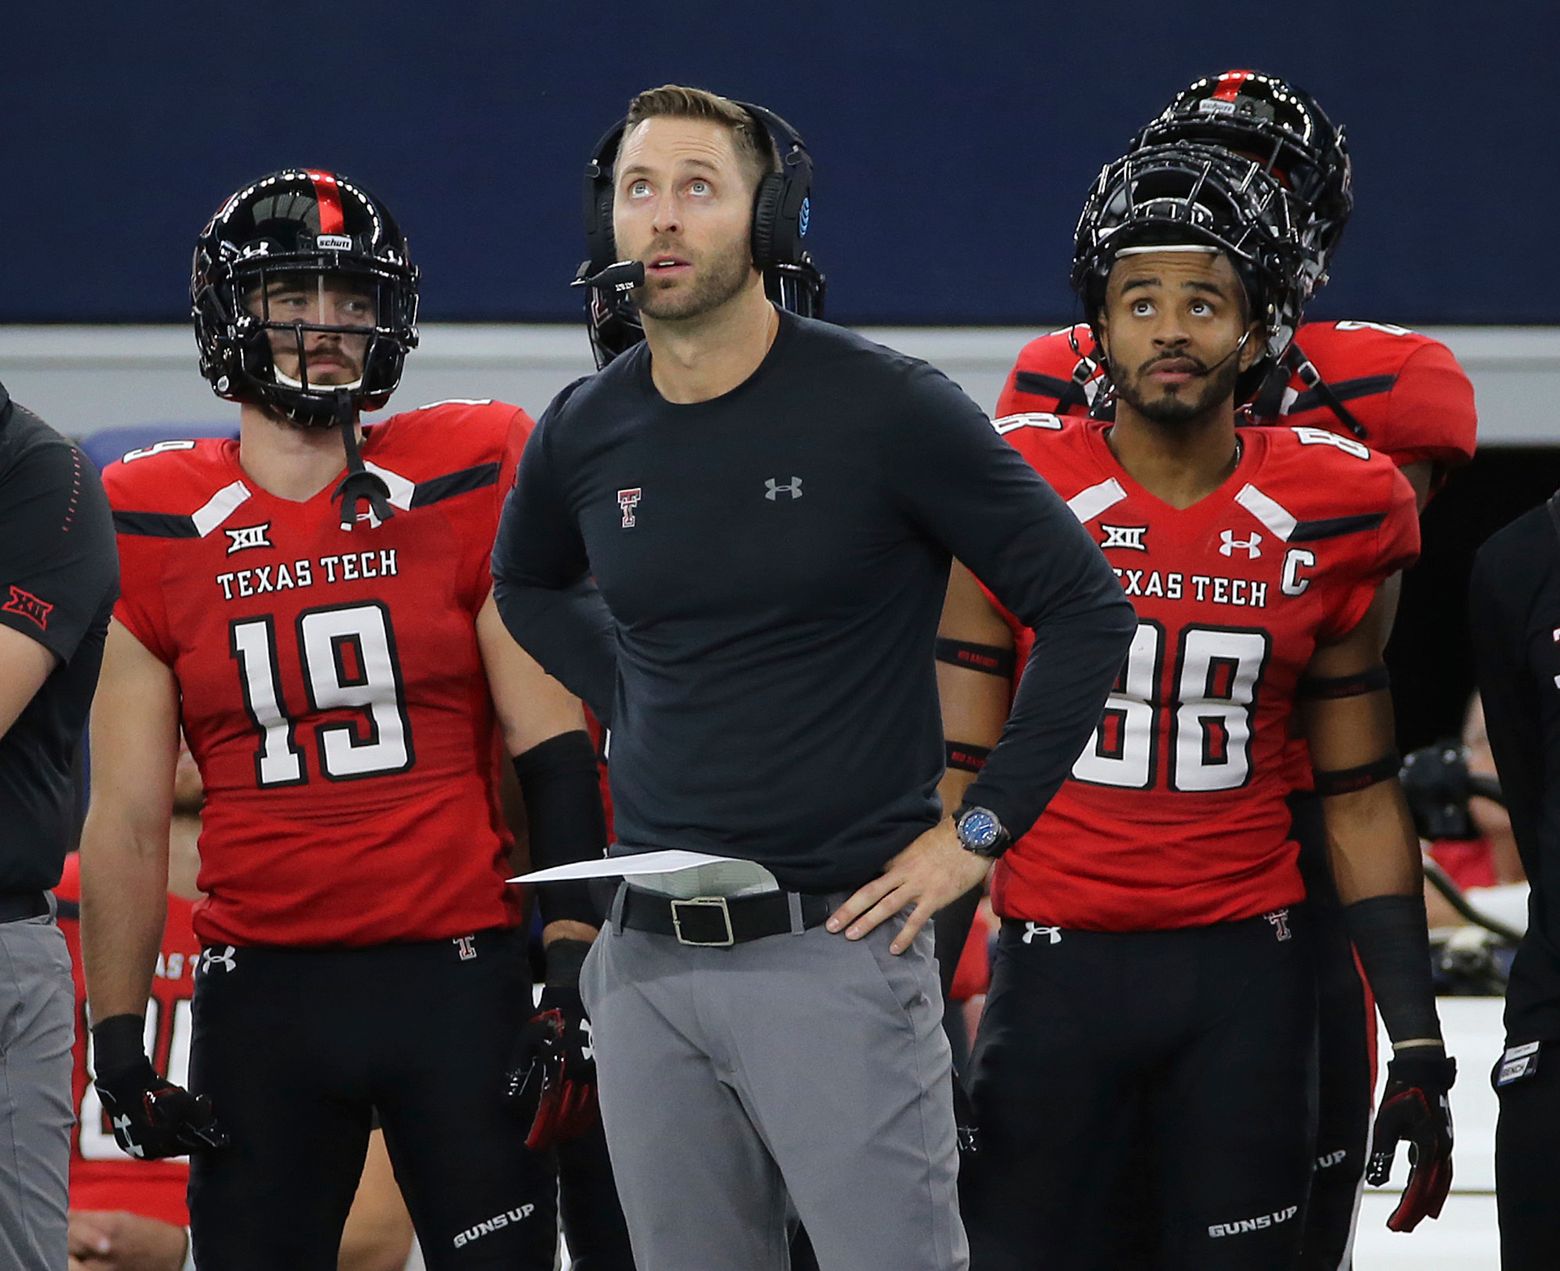 Texas Tech fires former QB Kingsbury after 6 years as coach | The Seattle  Times